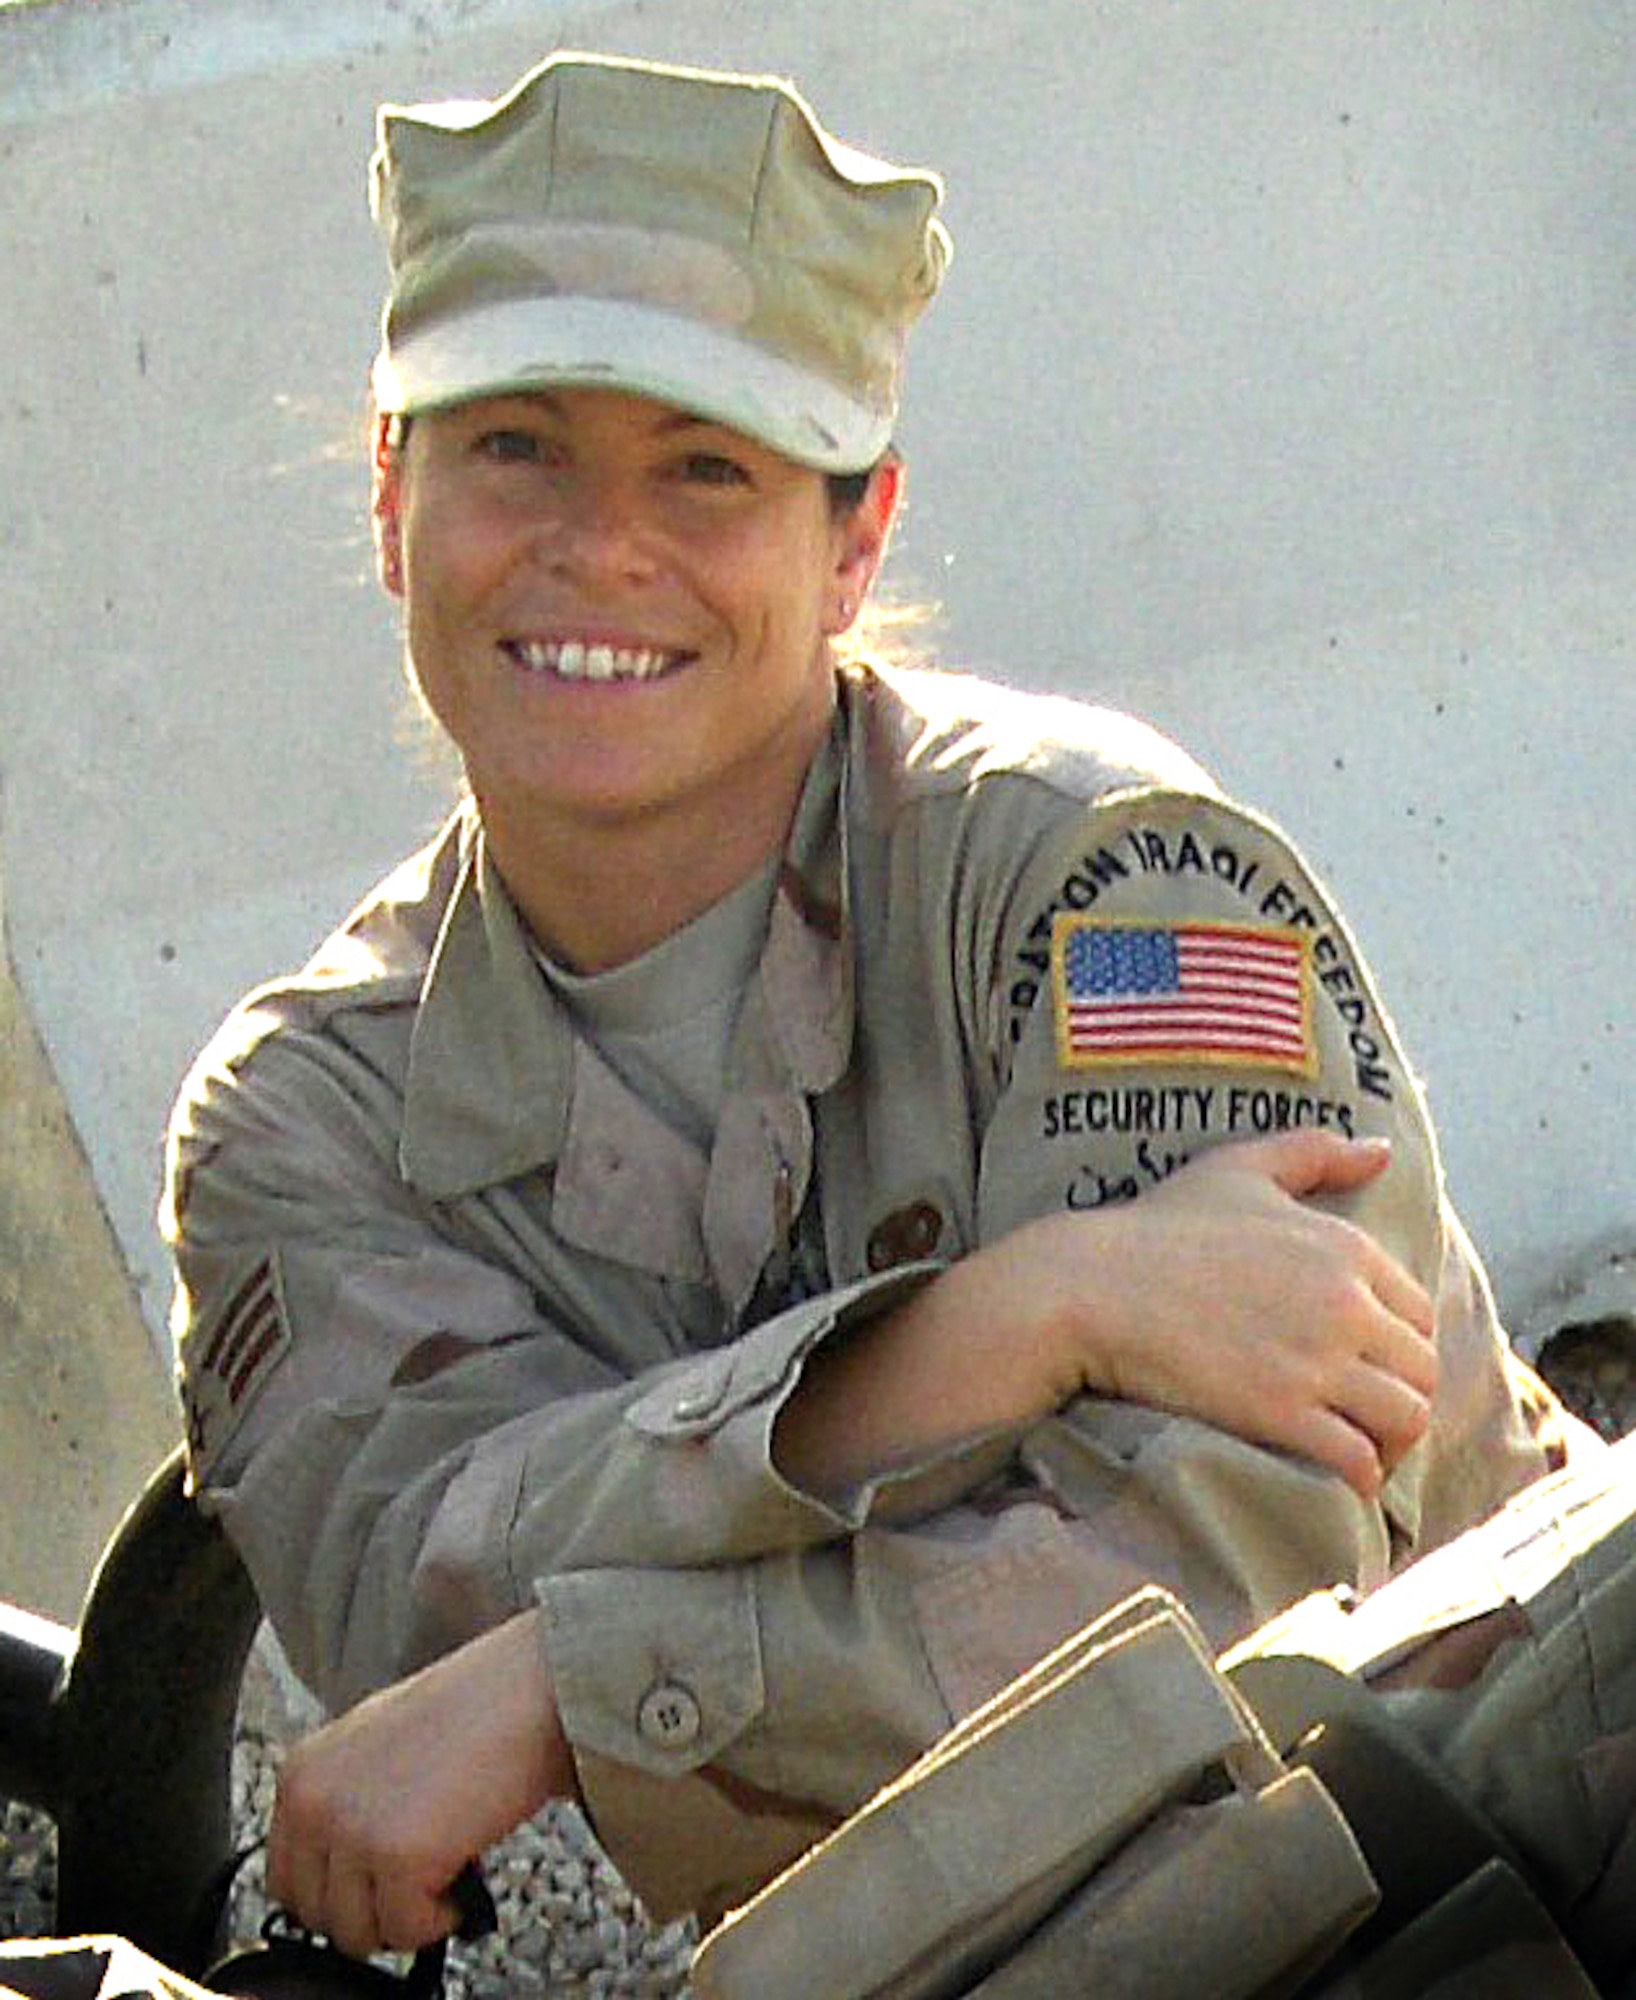 Air Force Reserve Senior Airman Diane Lopes was chosen to attend President Bush's State of the Union address Jan. 28 as one of the military representatives.  Airman Lopes was wounded during a rocket attack Sept. 21 while deployed to Kirkuk Air Base, Iraq. She is a security forces specialist with the 920th Rescue Wing at Patrick Air Force Base, Fla.  (Courtesy photo) 